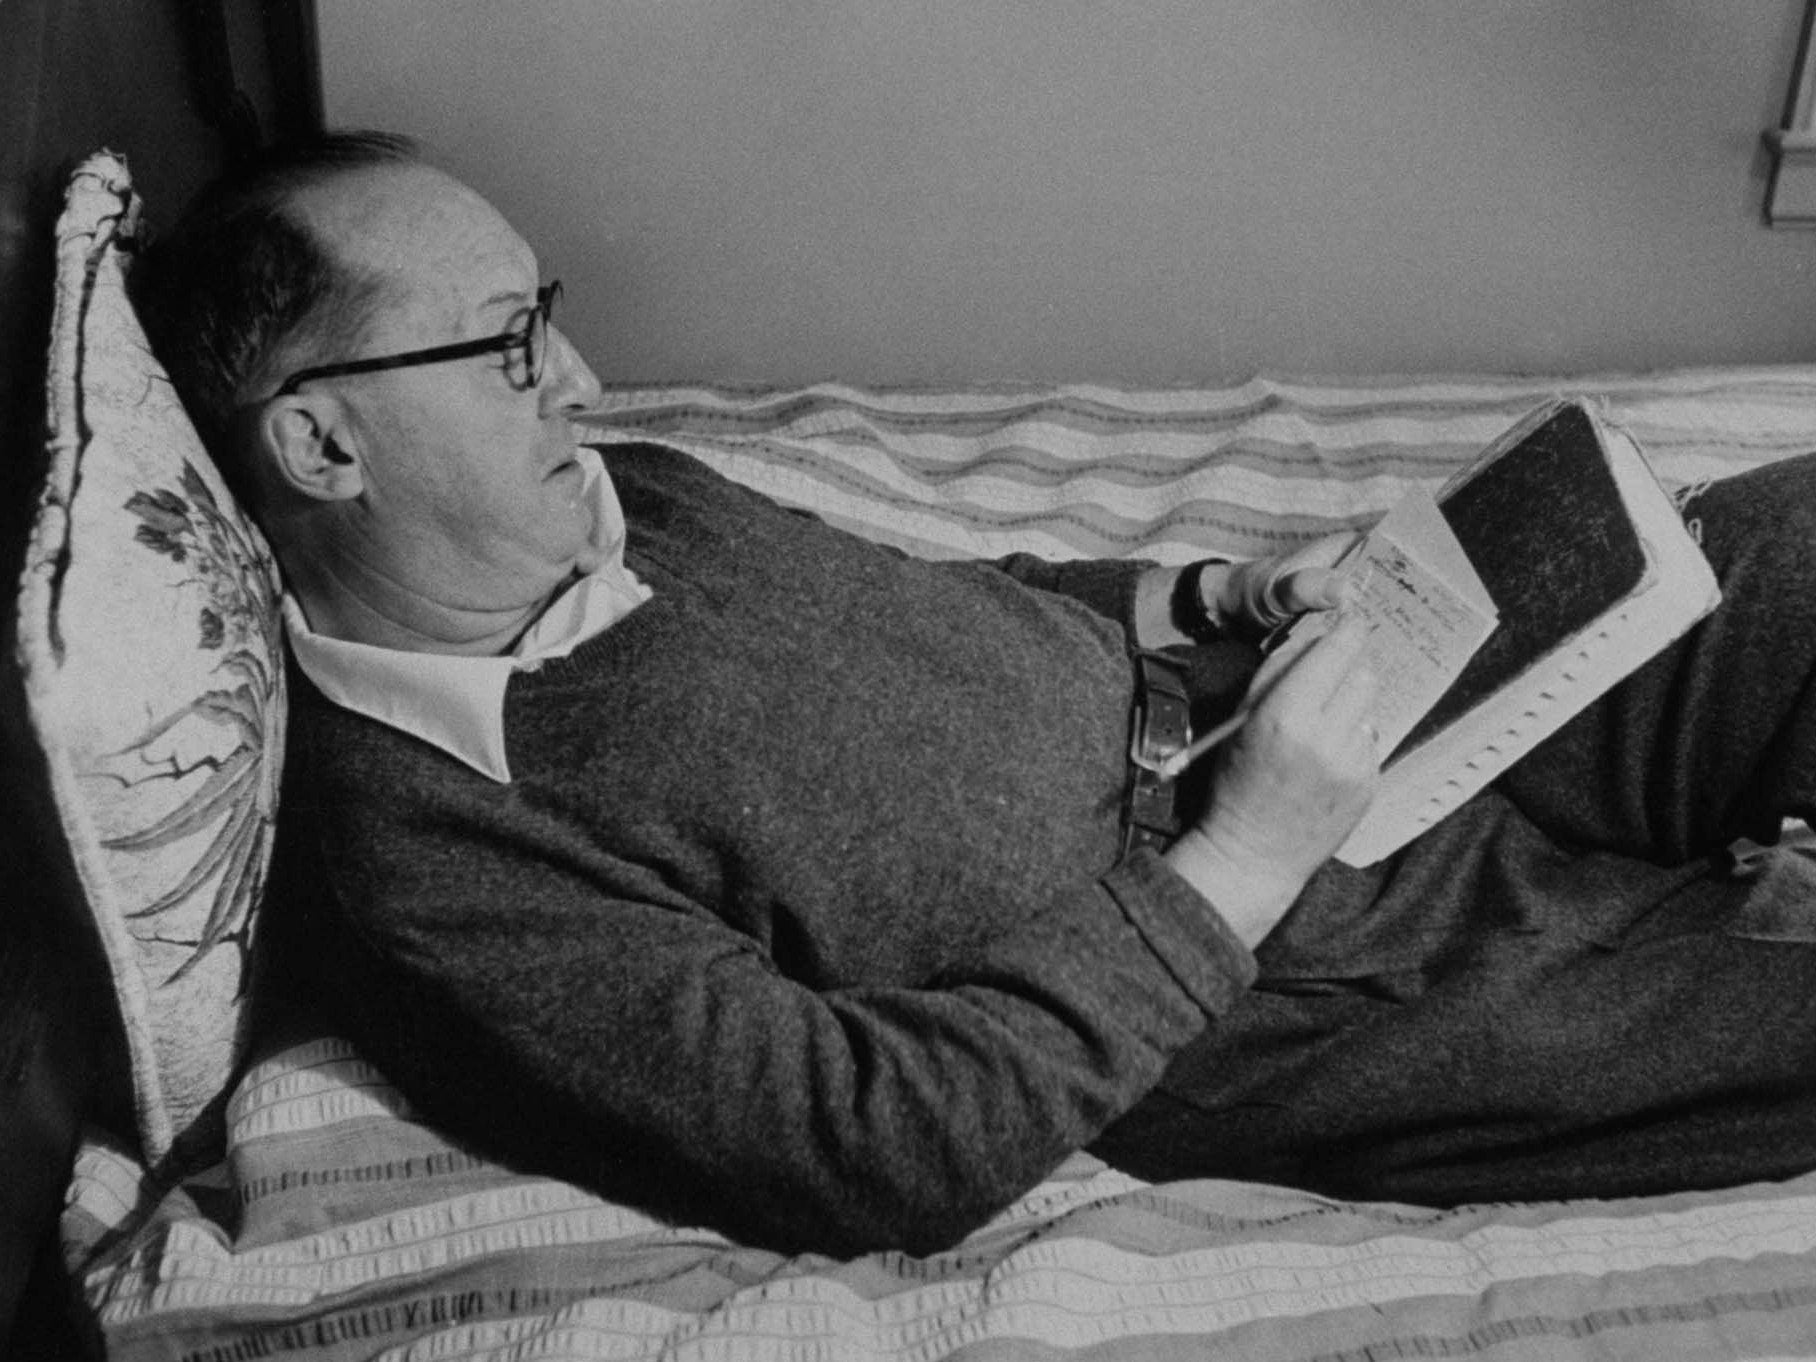 Vladimir Nabokov lying in bed taking notes. A Good Used Book is an independent online bookstore selling New, Used and Vintage books in Los Angeles, California. AAPI-Owned Small Business. Used Books. Free Shipping on orders $40+.